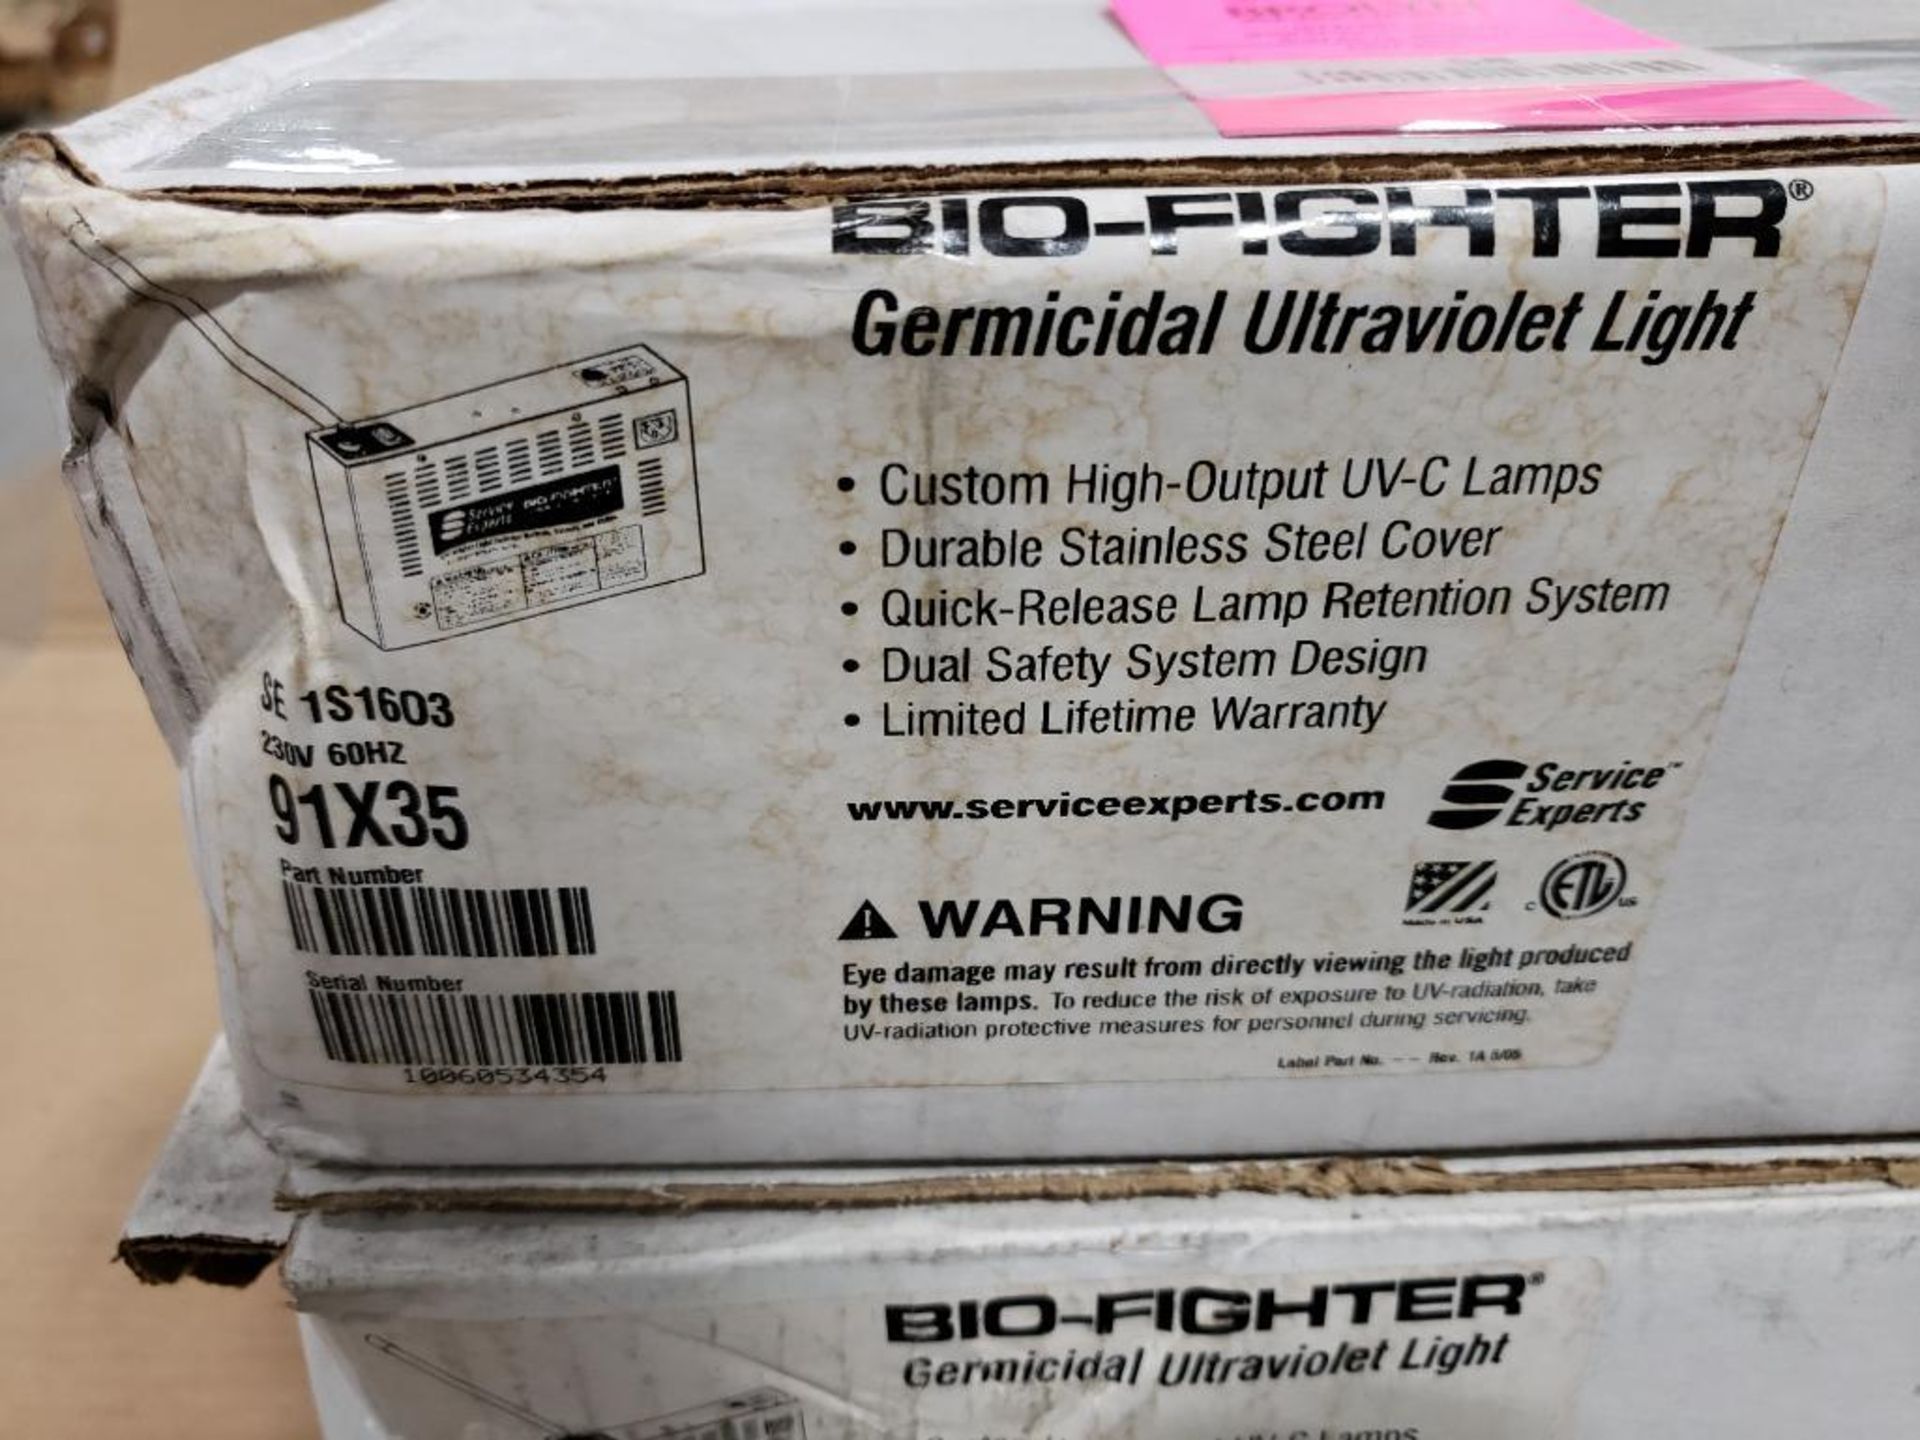 Qty 3 - Service Experts. Bio-Fighter germicidal ultraviolet light. - Image 2 of 4